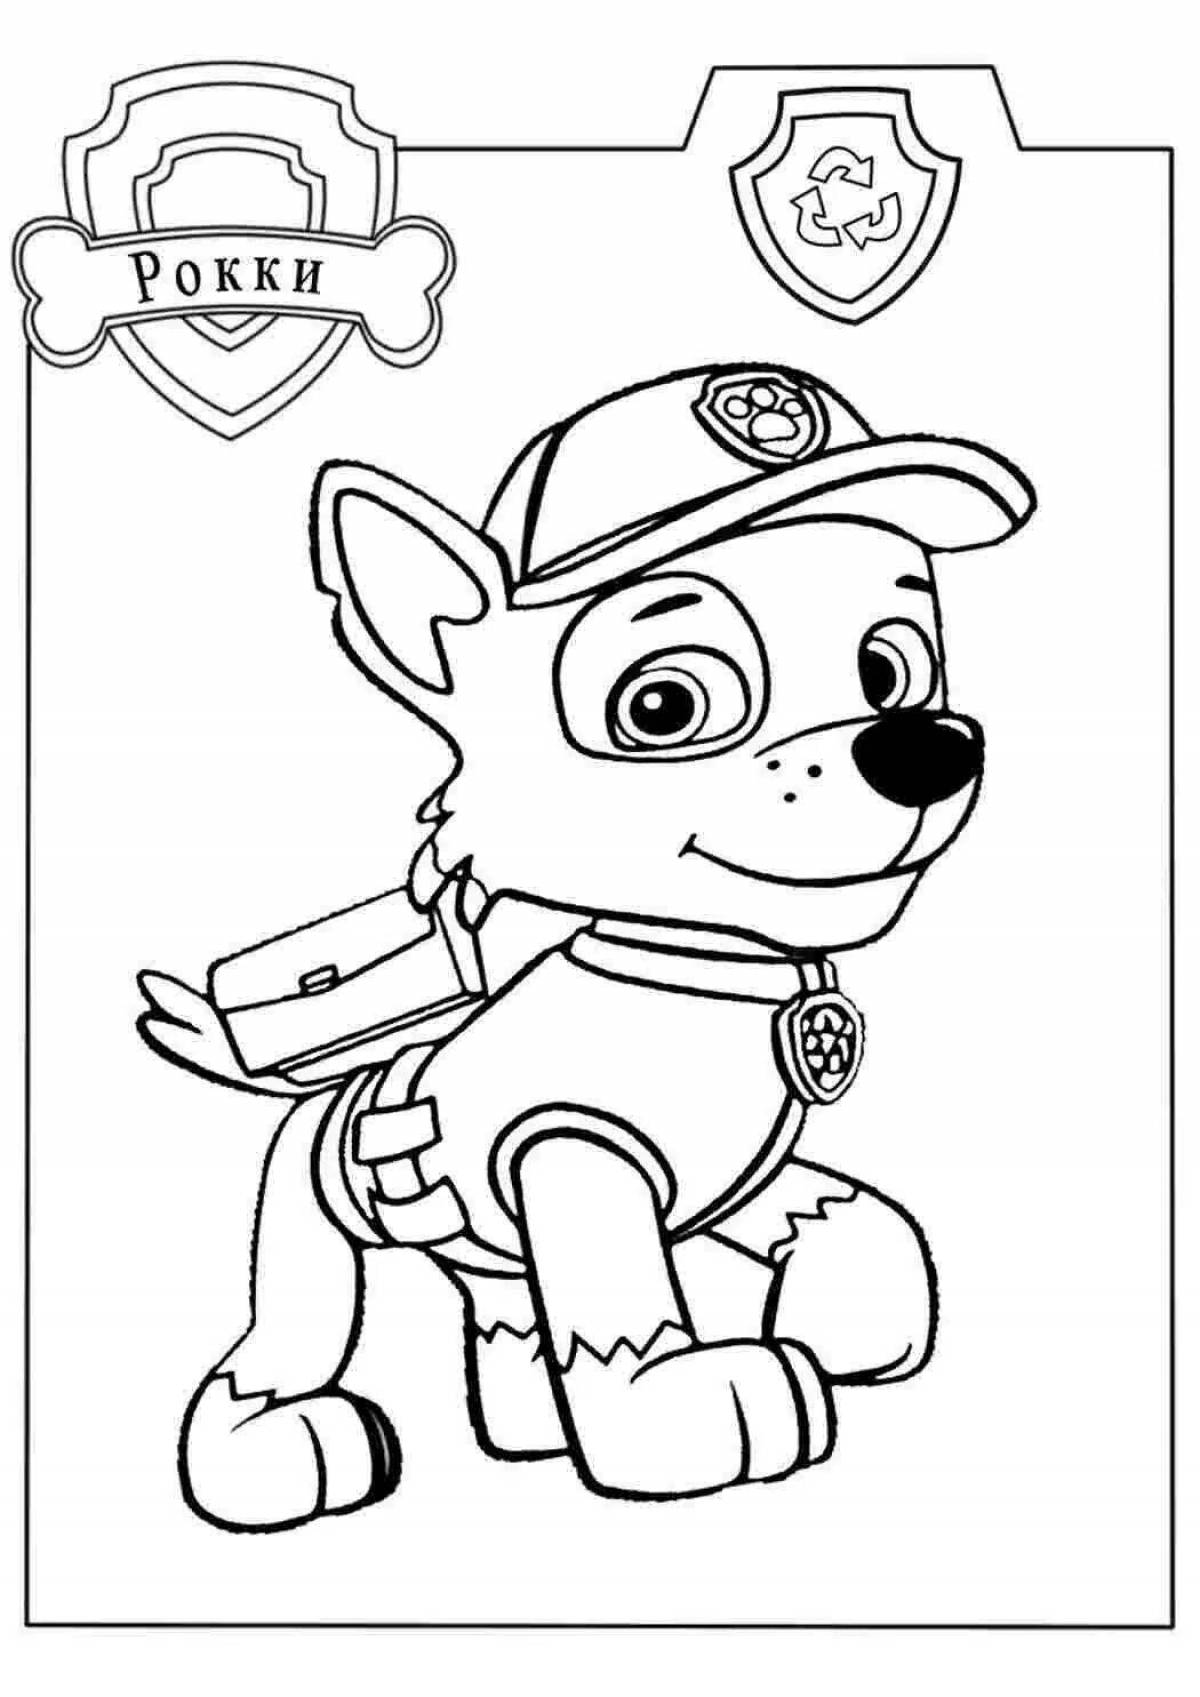 Fun Paw Patrol Coloring Page for Toddlers